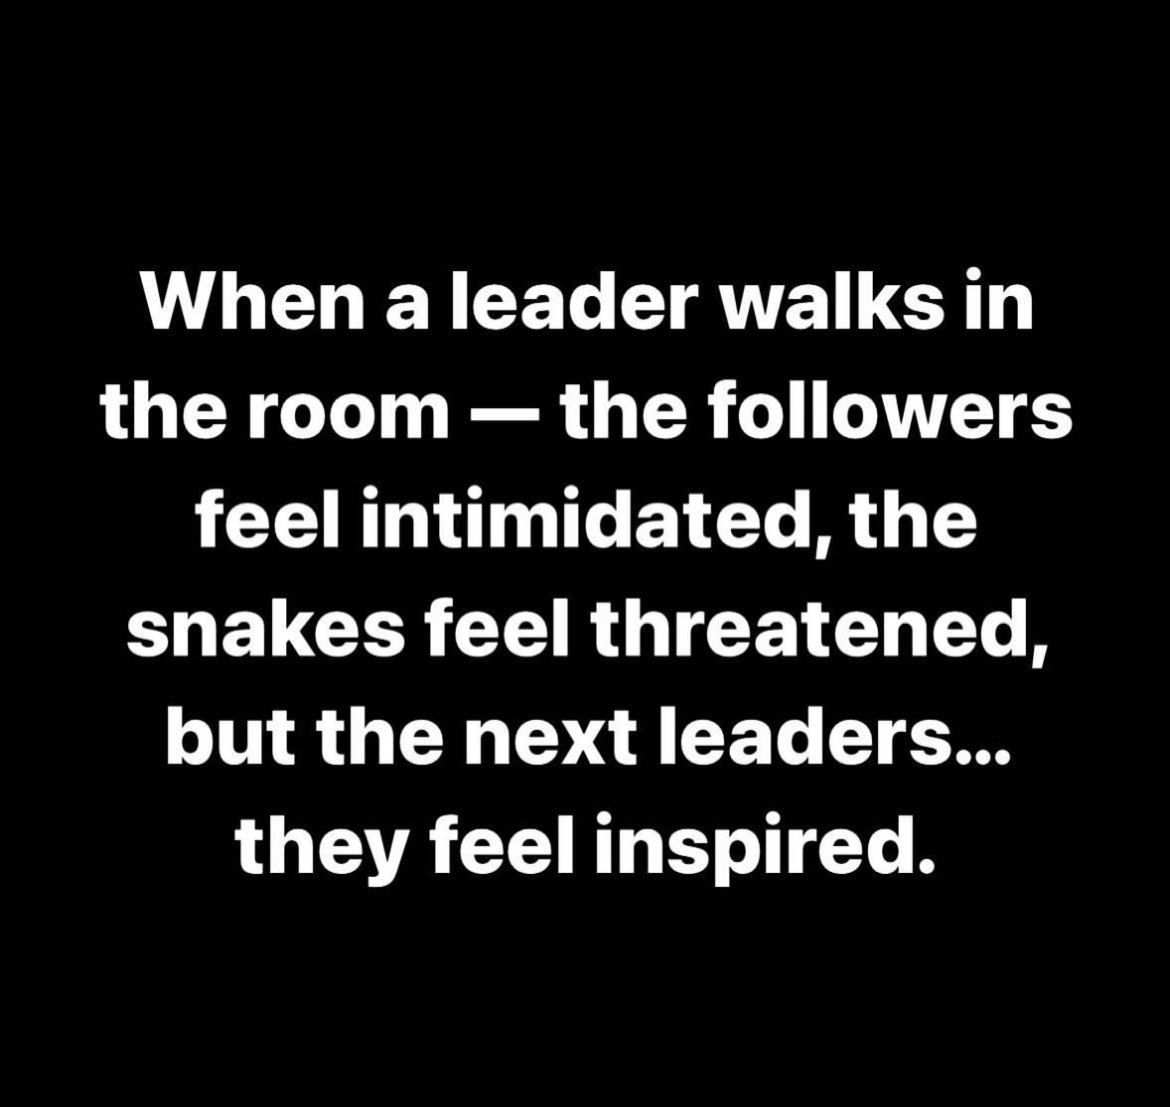 The way this hit me! I've worked my whole career with the intent to build leaders, inspire others, and love out loud! It’s the #nextleaders for me! 🖤🙏🏽